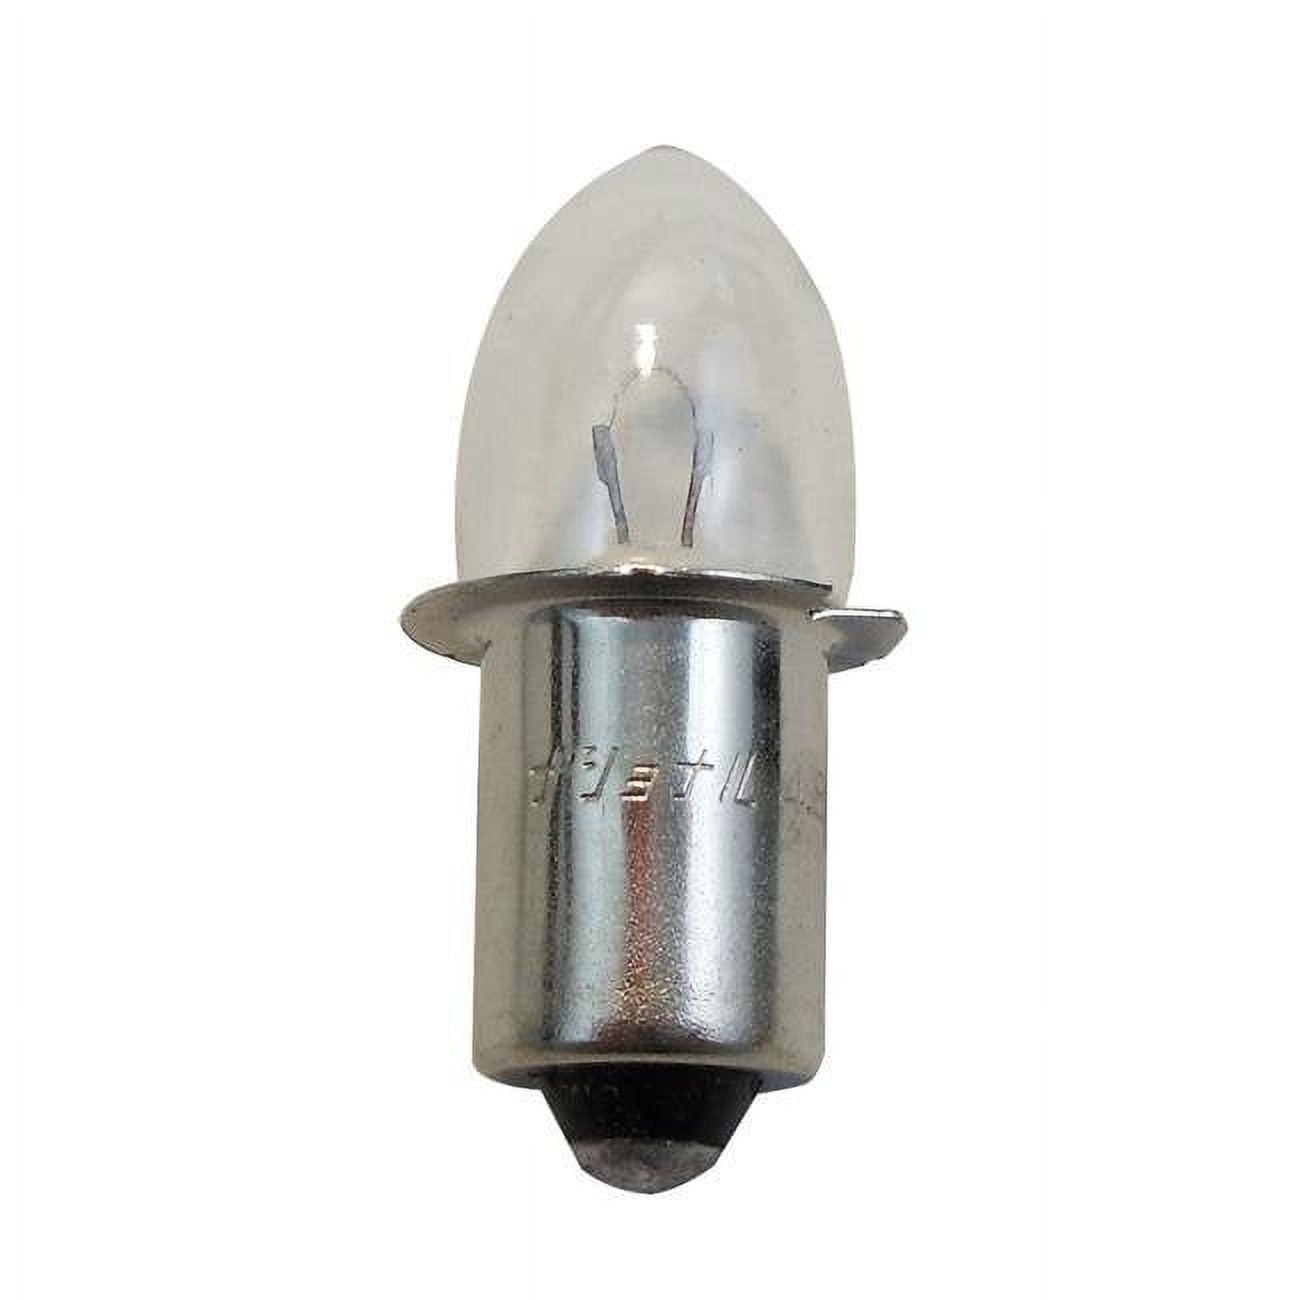 Mb-48pe 4.8v, 0.5 Amp Pre-focused Glass Replacement Bulb For Flashlights